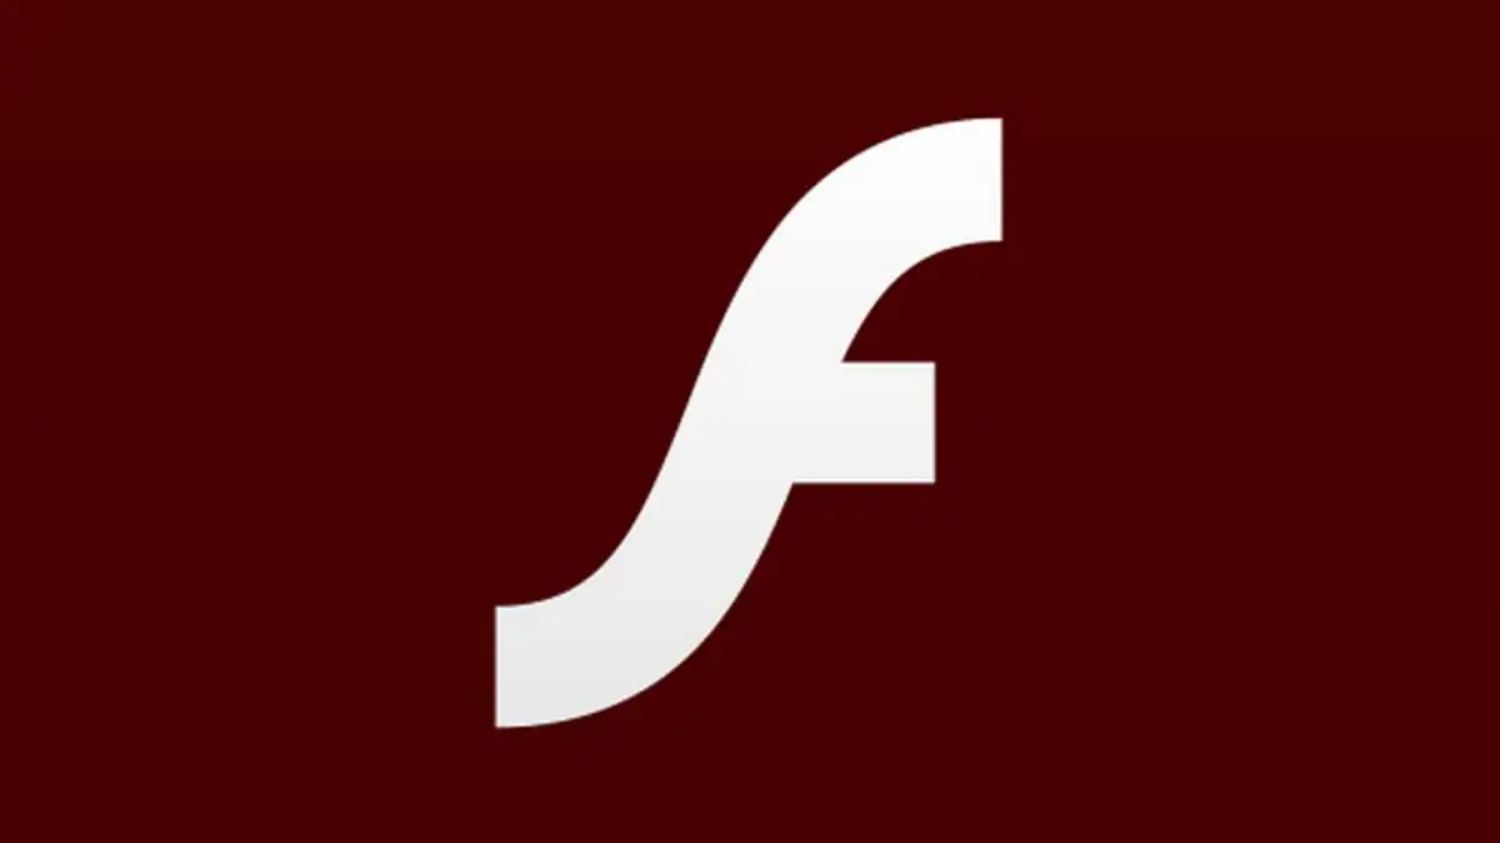 Adobe Flash Player Says Goodbye: A Look Back at Its Iconic Journey and How You Can Still Play Flash Games